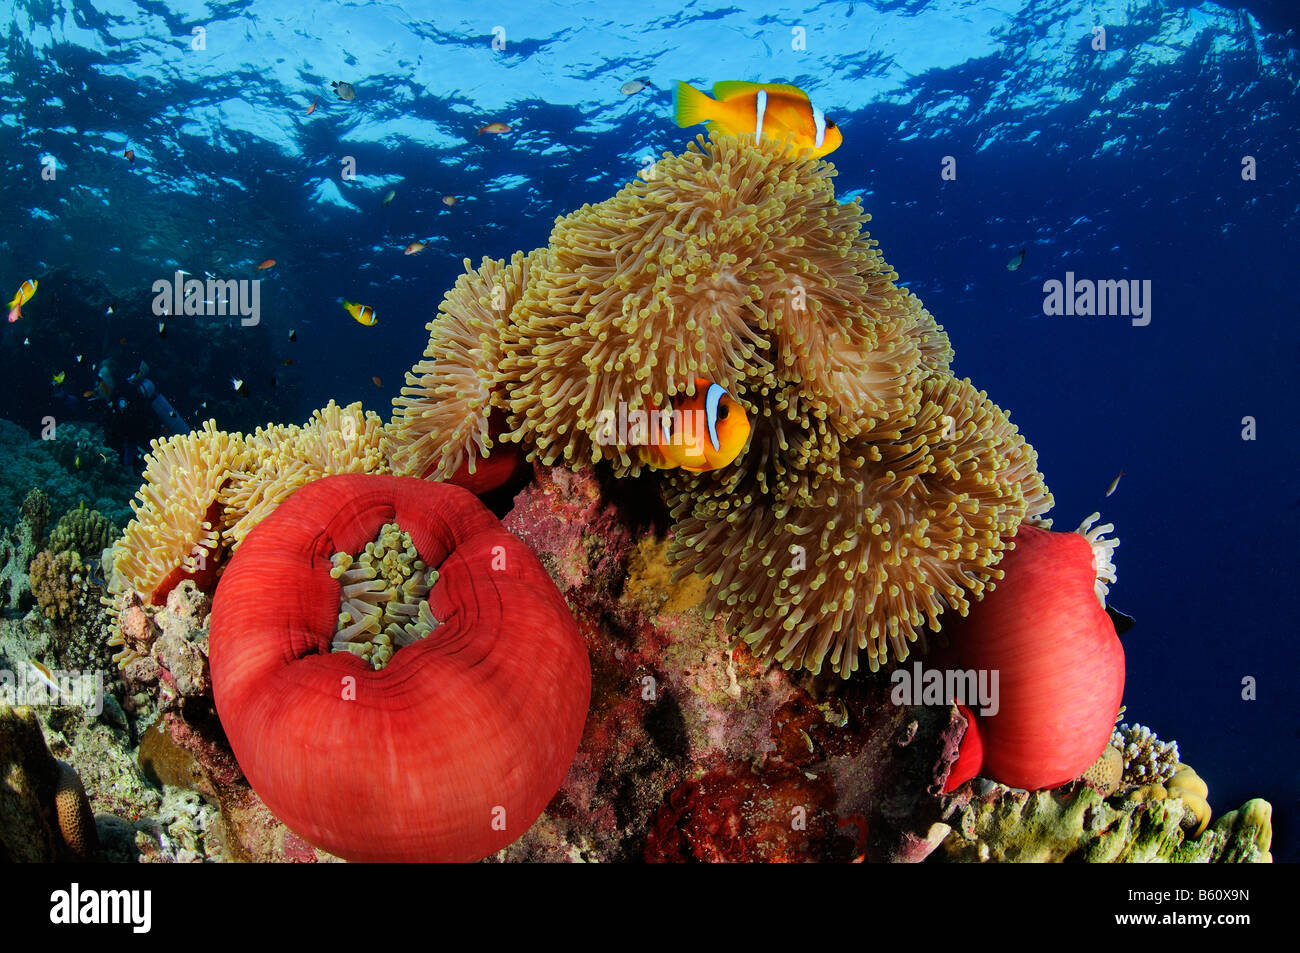 Amphiprion bicinctus and Heteractis magnifica, Red sea anemonefishes in magnificent sea anemone or Ritteri anemone, Red Sea Stock Photo